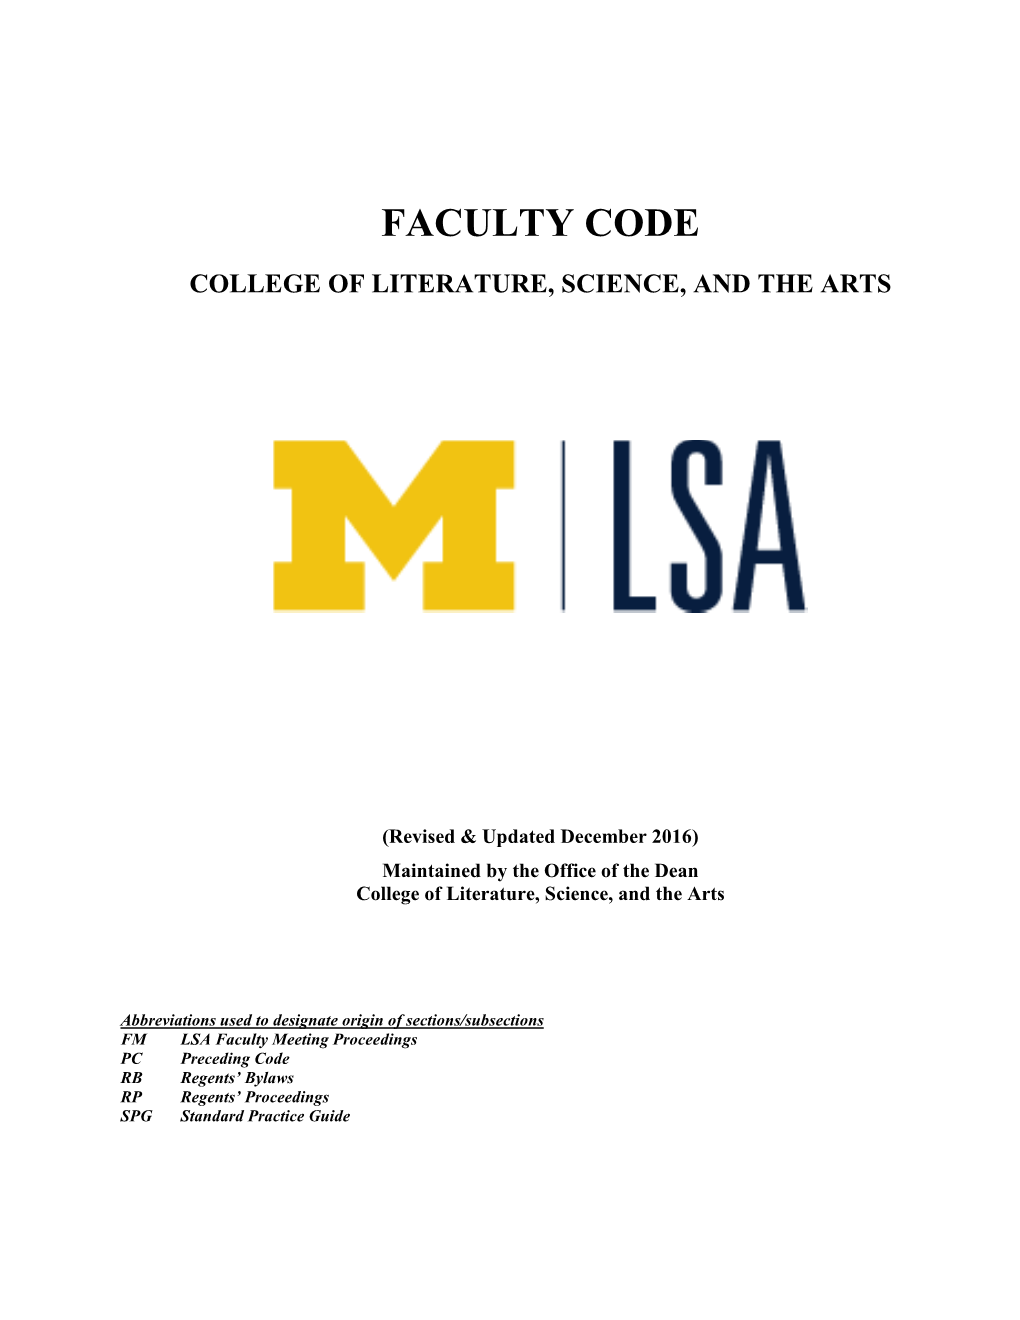 Faculty Code College of Literature, Science, and the Arts